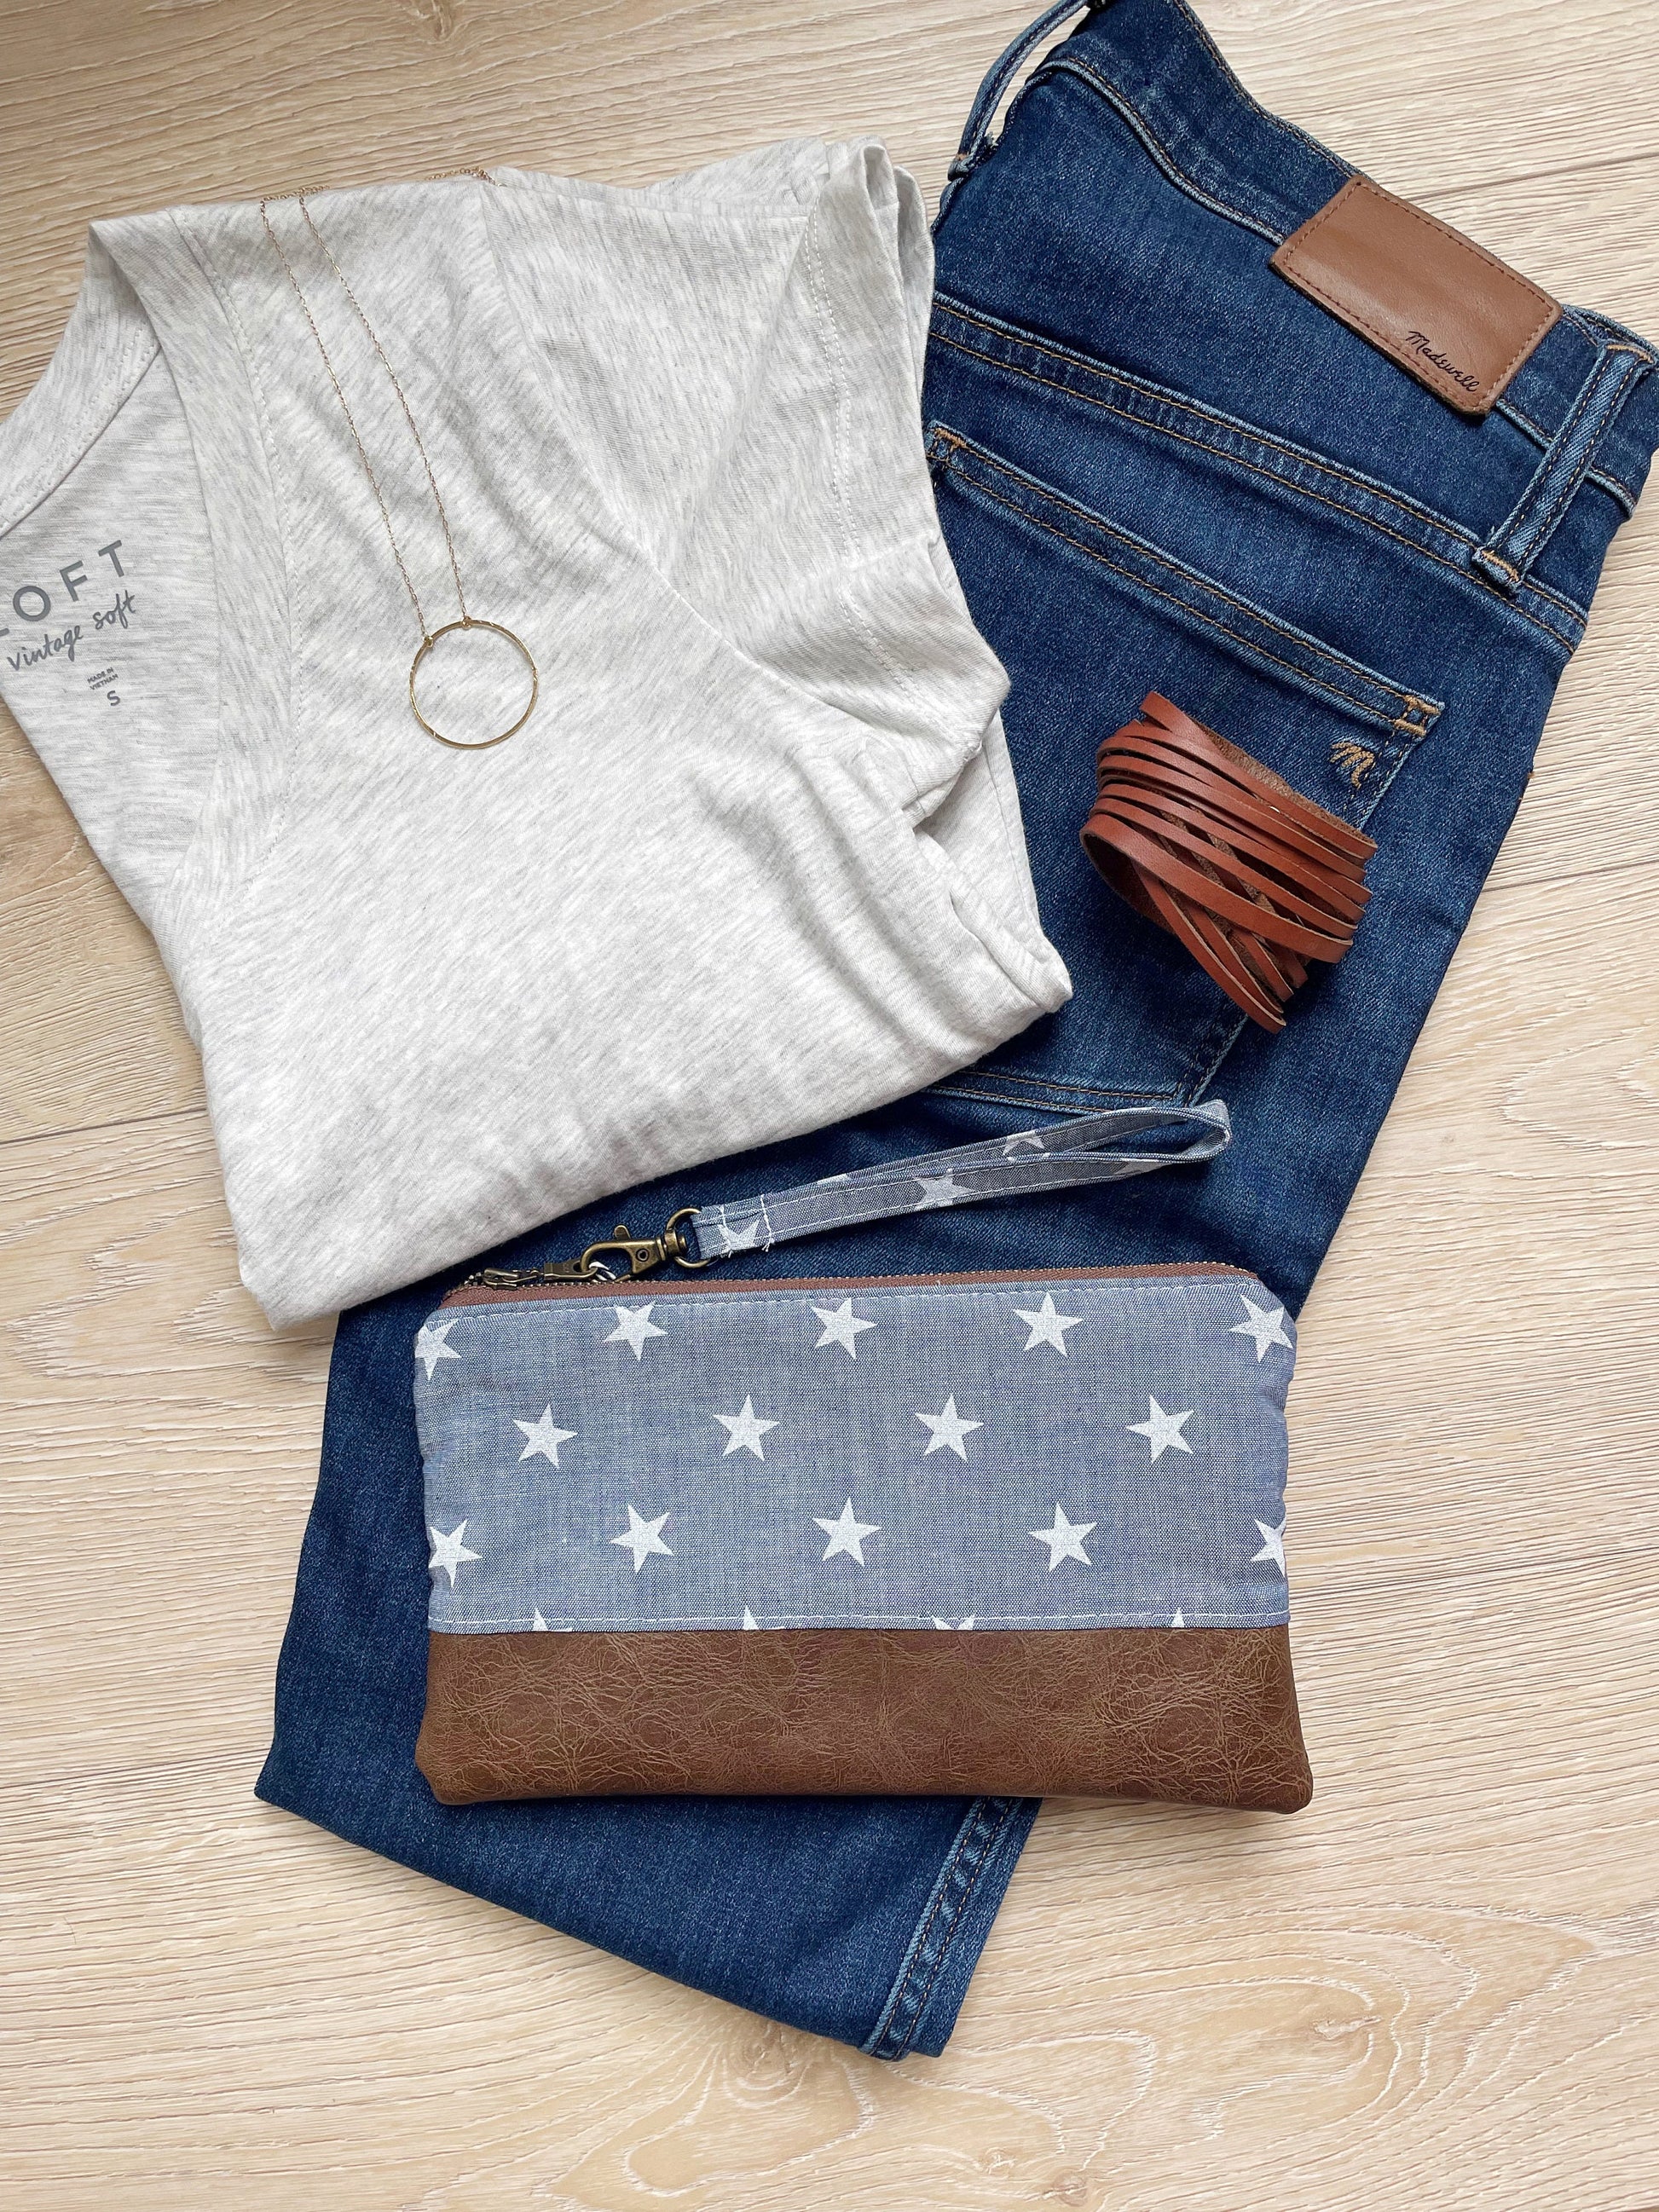 chambray wristlet with white stars and matching wrist strap. brown vinyl along the bottom and antique brass zipper. styled with jeans and a gray shirt with leather cuff and gold necklace.